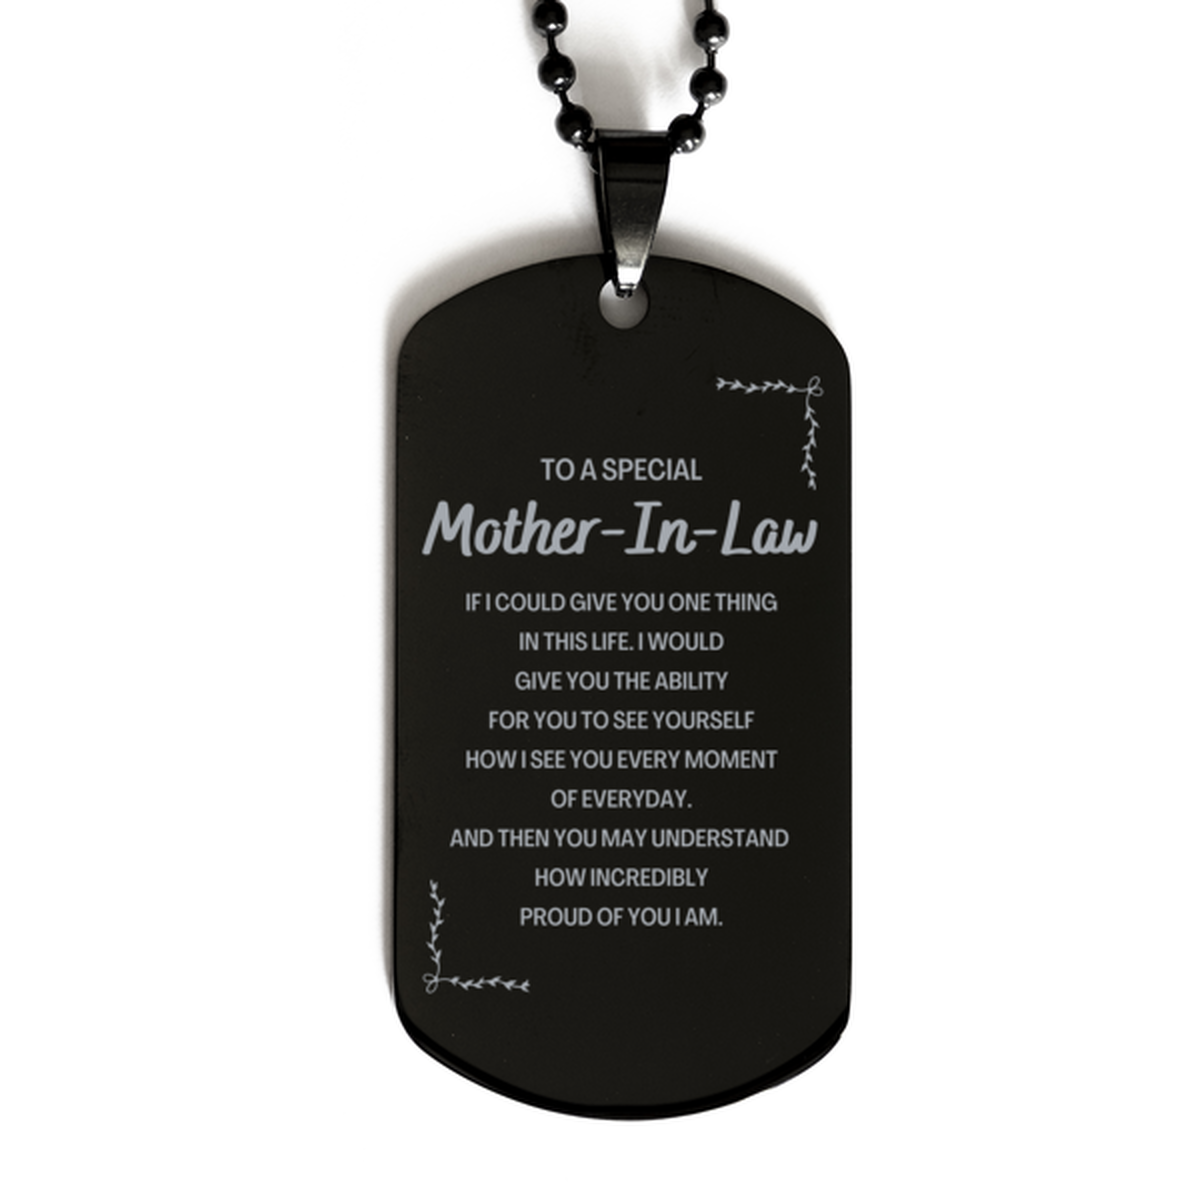 To My Mother-In-Law Black Dog Tag, Gifts For Mother-In-Law Engraved, Inspirational Gifts for Christmas Birthday, Epic Gifts for Mother-In-Law To A Special Mother-In-Law how incredibly proud of you I am